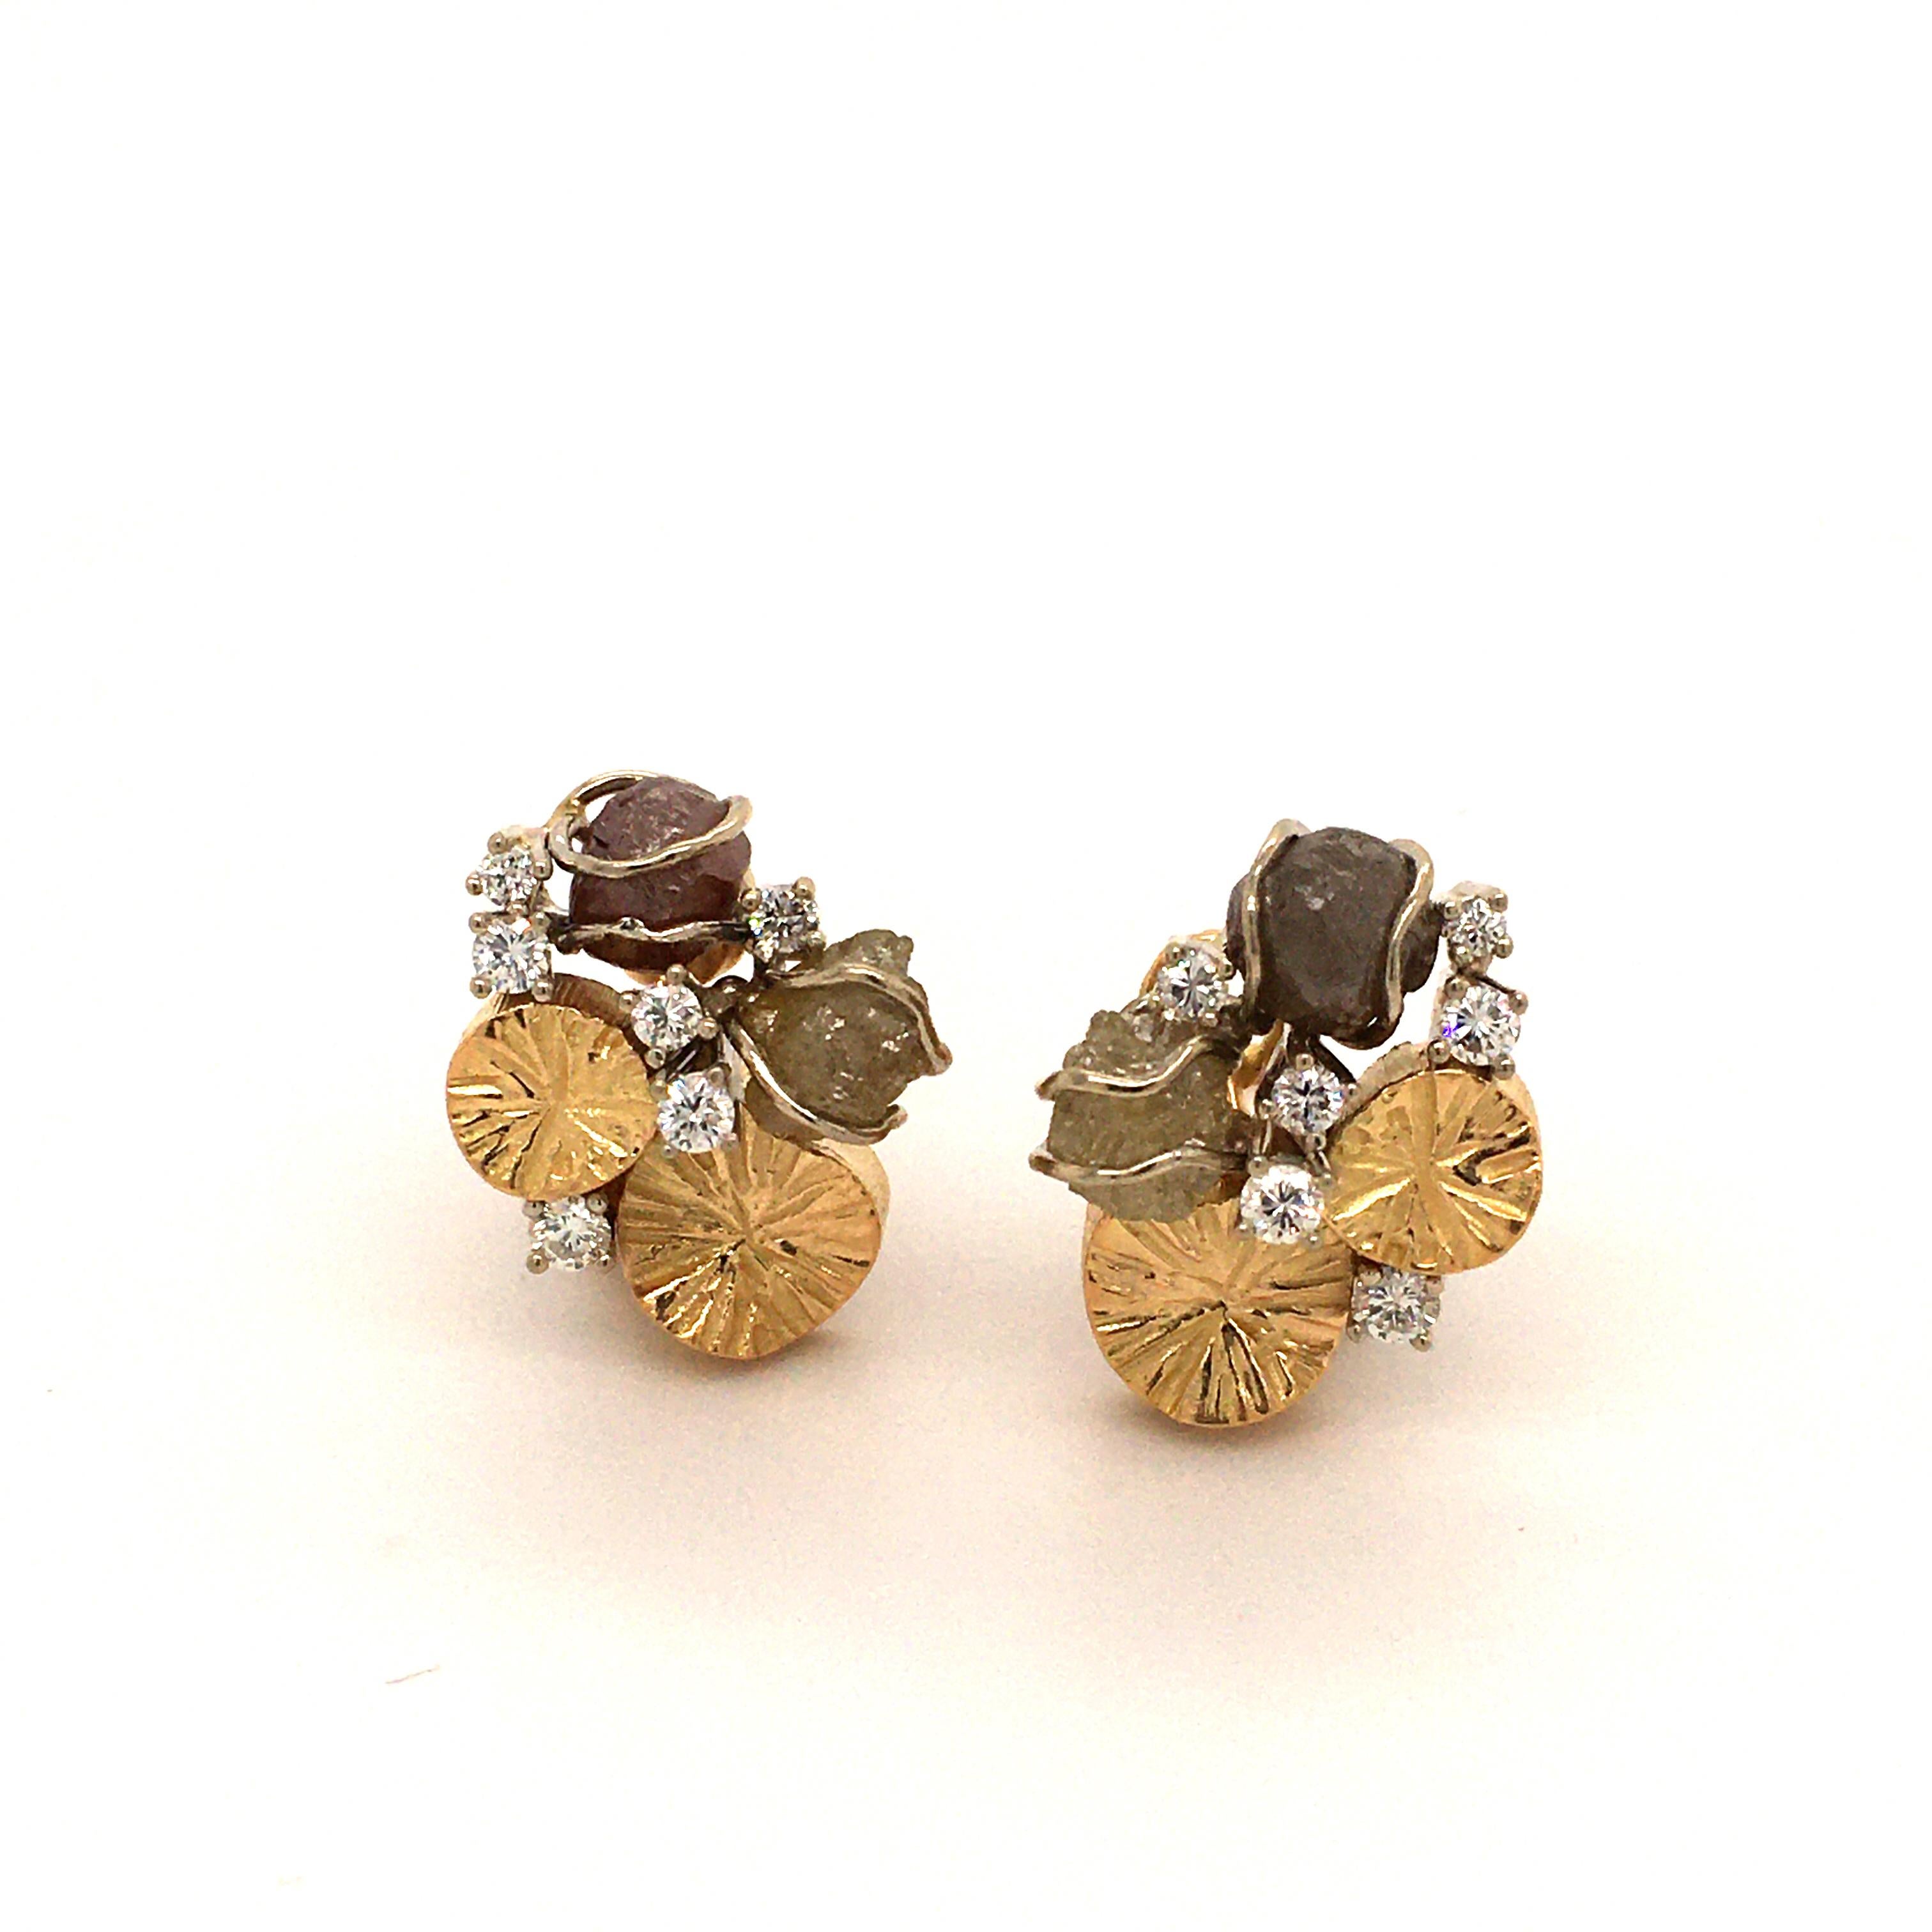 This pretty pair of ear clips is made of 18k white and yellow gold. They are set with 2 rough diamonds each, in a brownish and yellowish tone. The 12 brilliants are totalling 0.40 ct with H-vs quality. The decorative hand engraved gold elements